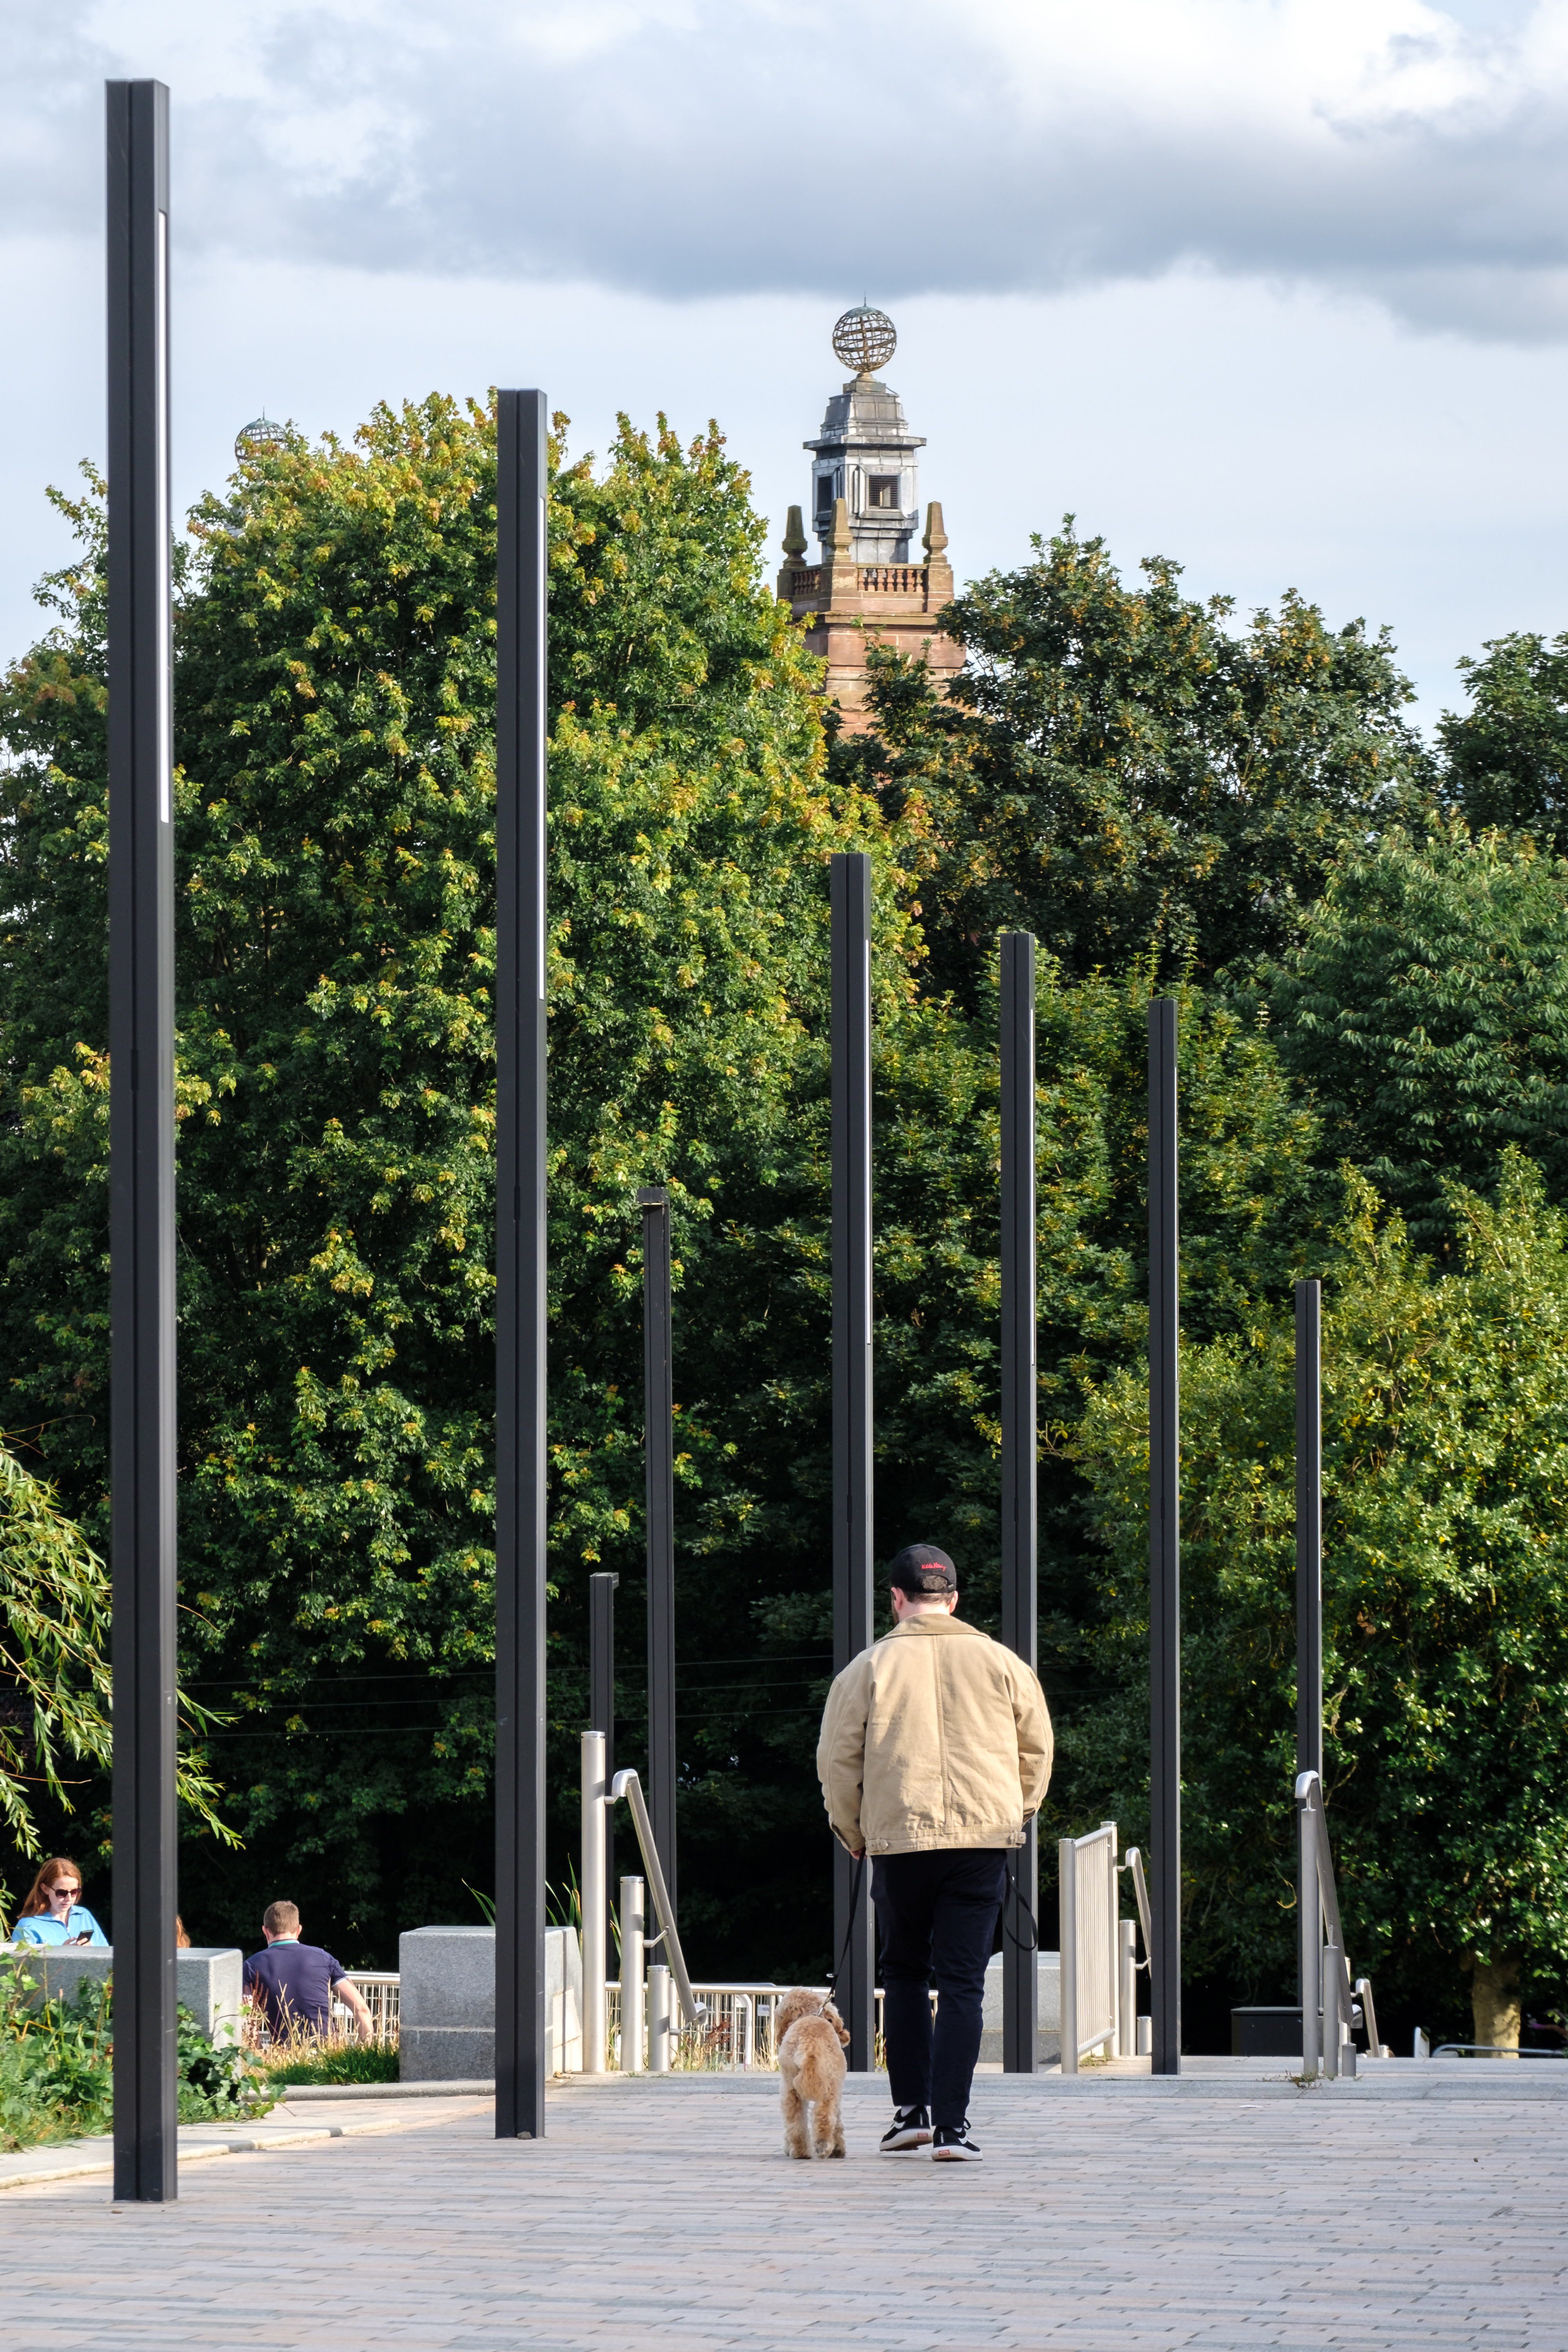 a man walking down a walkway with tall poles and a tower in the background